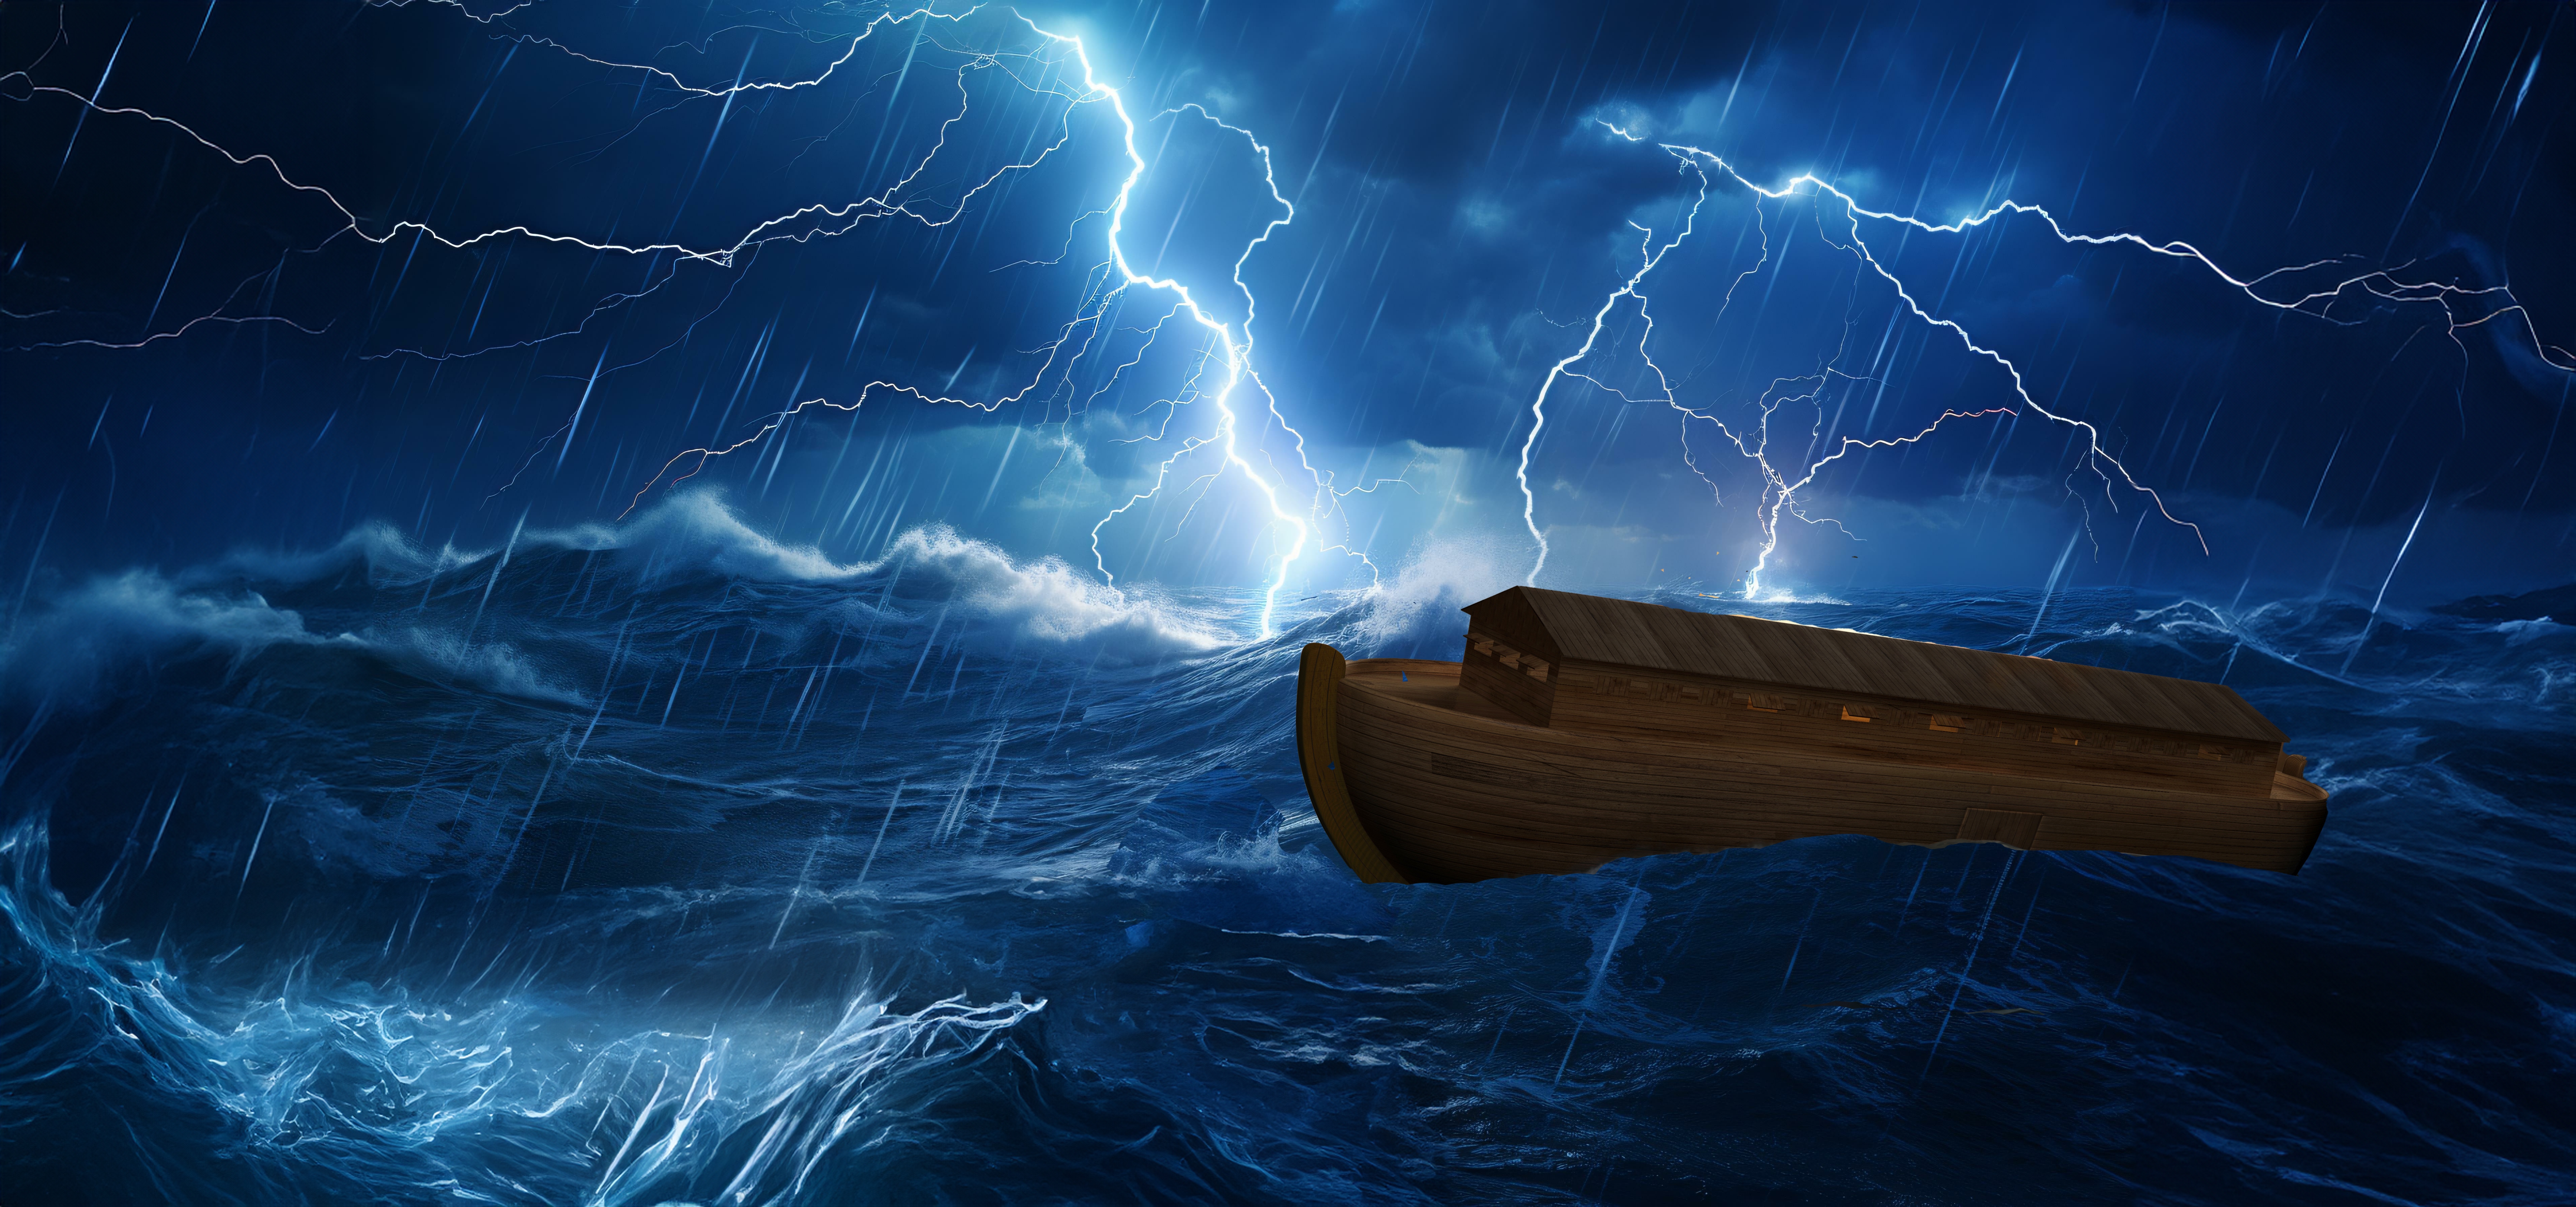 The days of Noah were strange and enigmatic days.